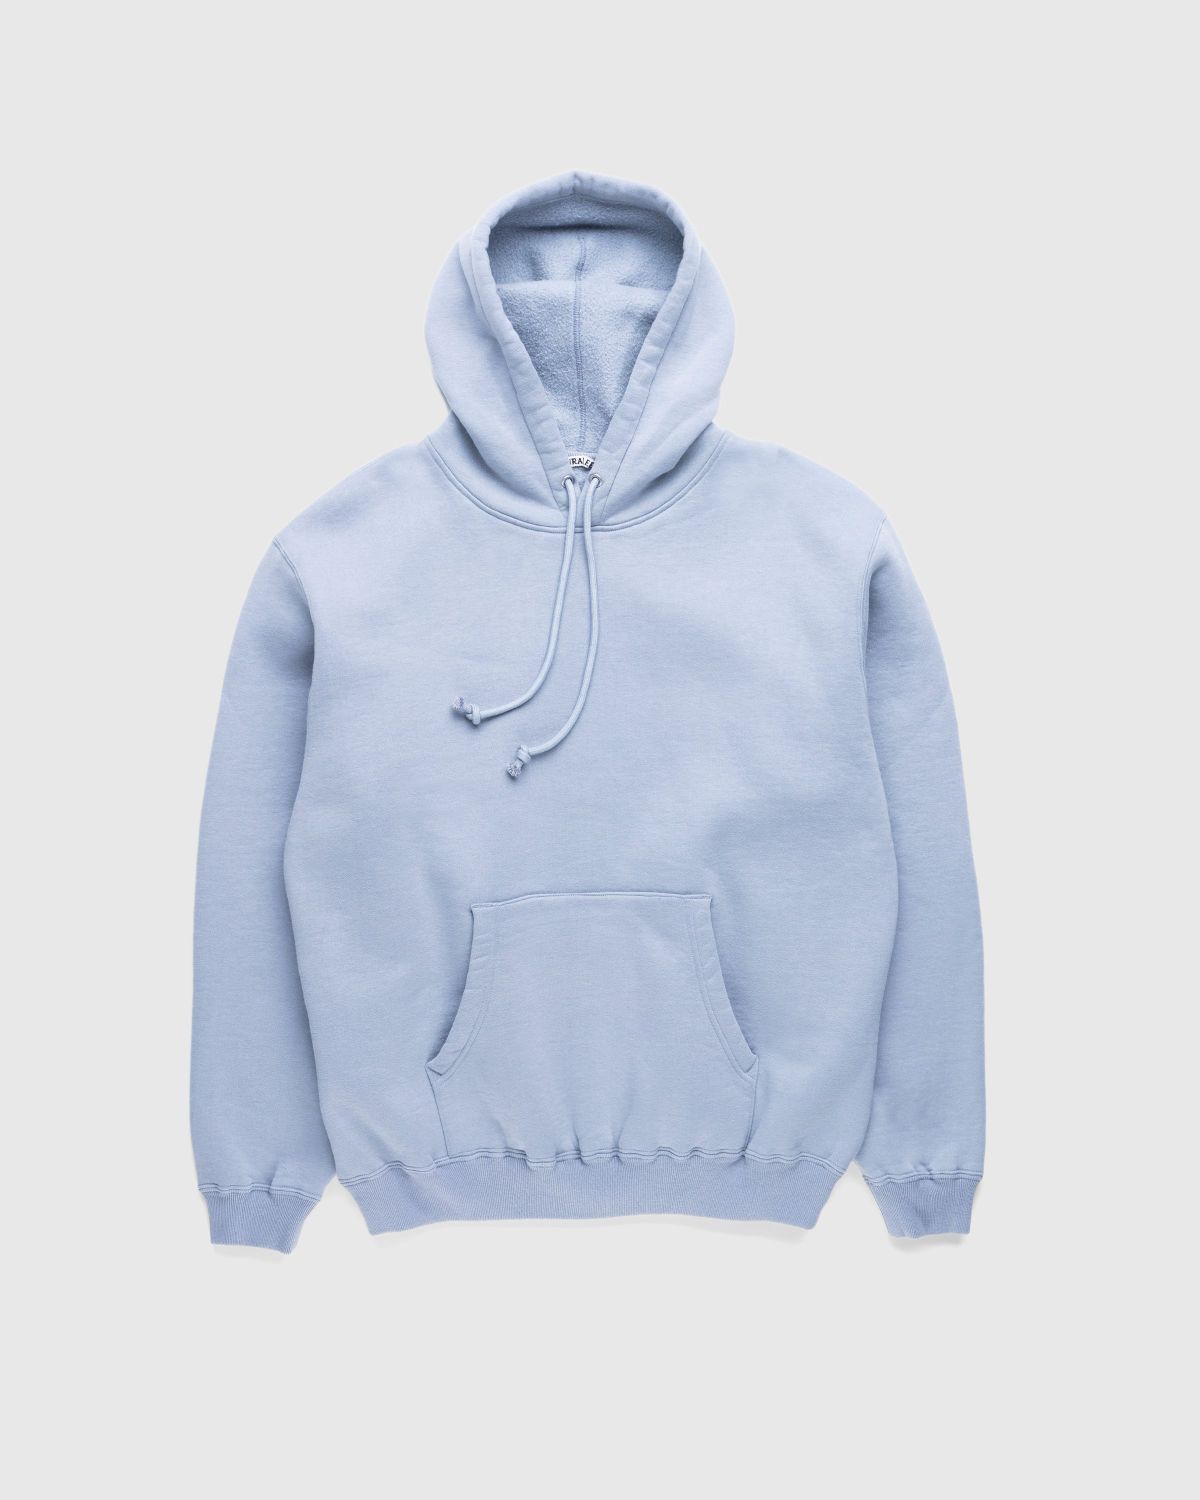 Auralee – Smooth Soft Pullover Hoodie Blue/Gray